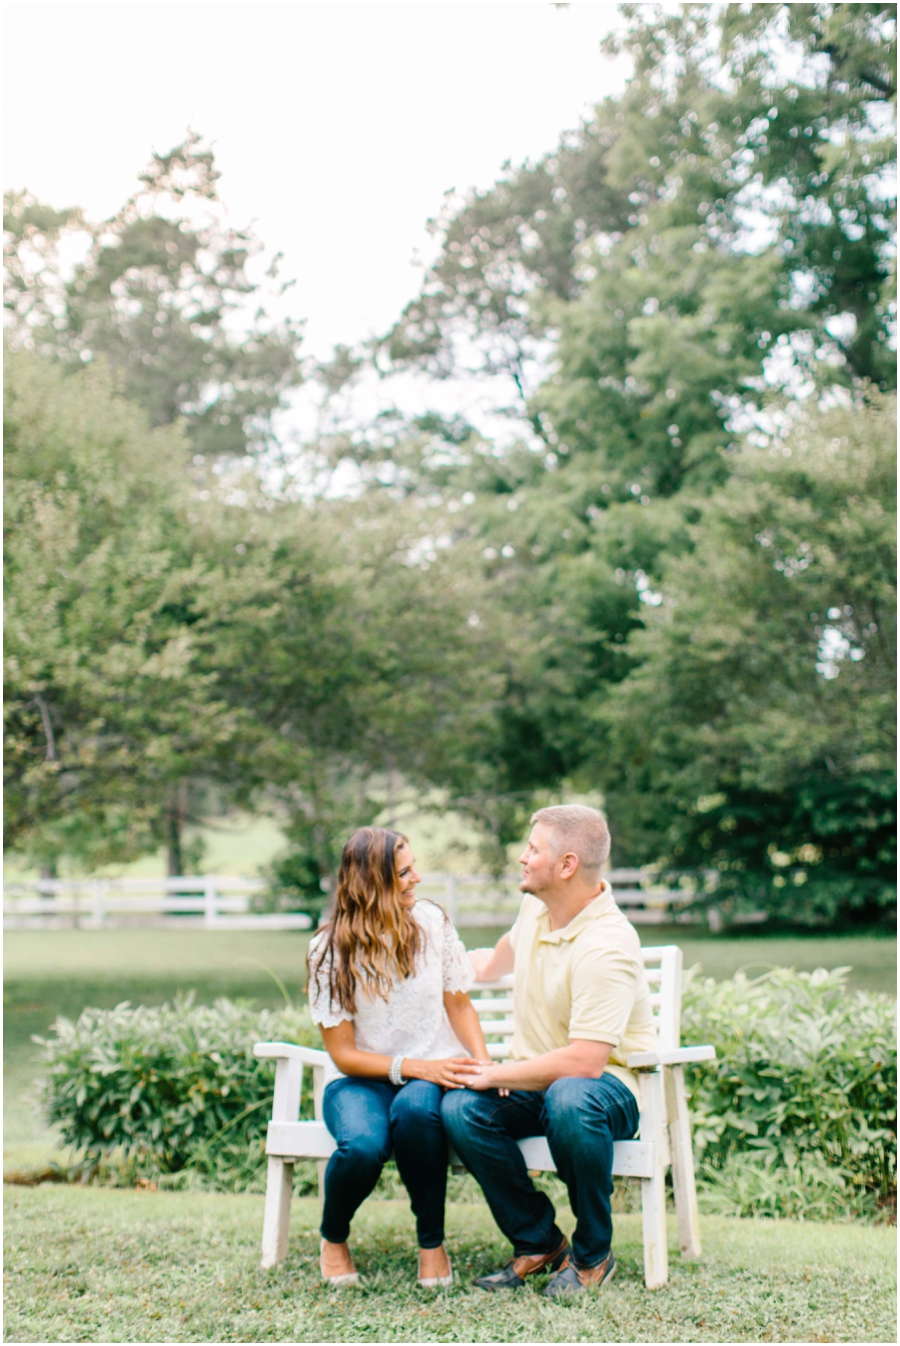 Tuckahoe Planation Engagement / Hayley and Chris